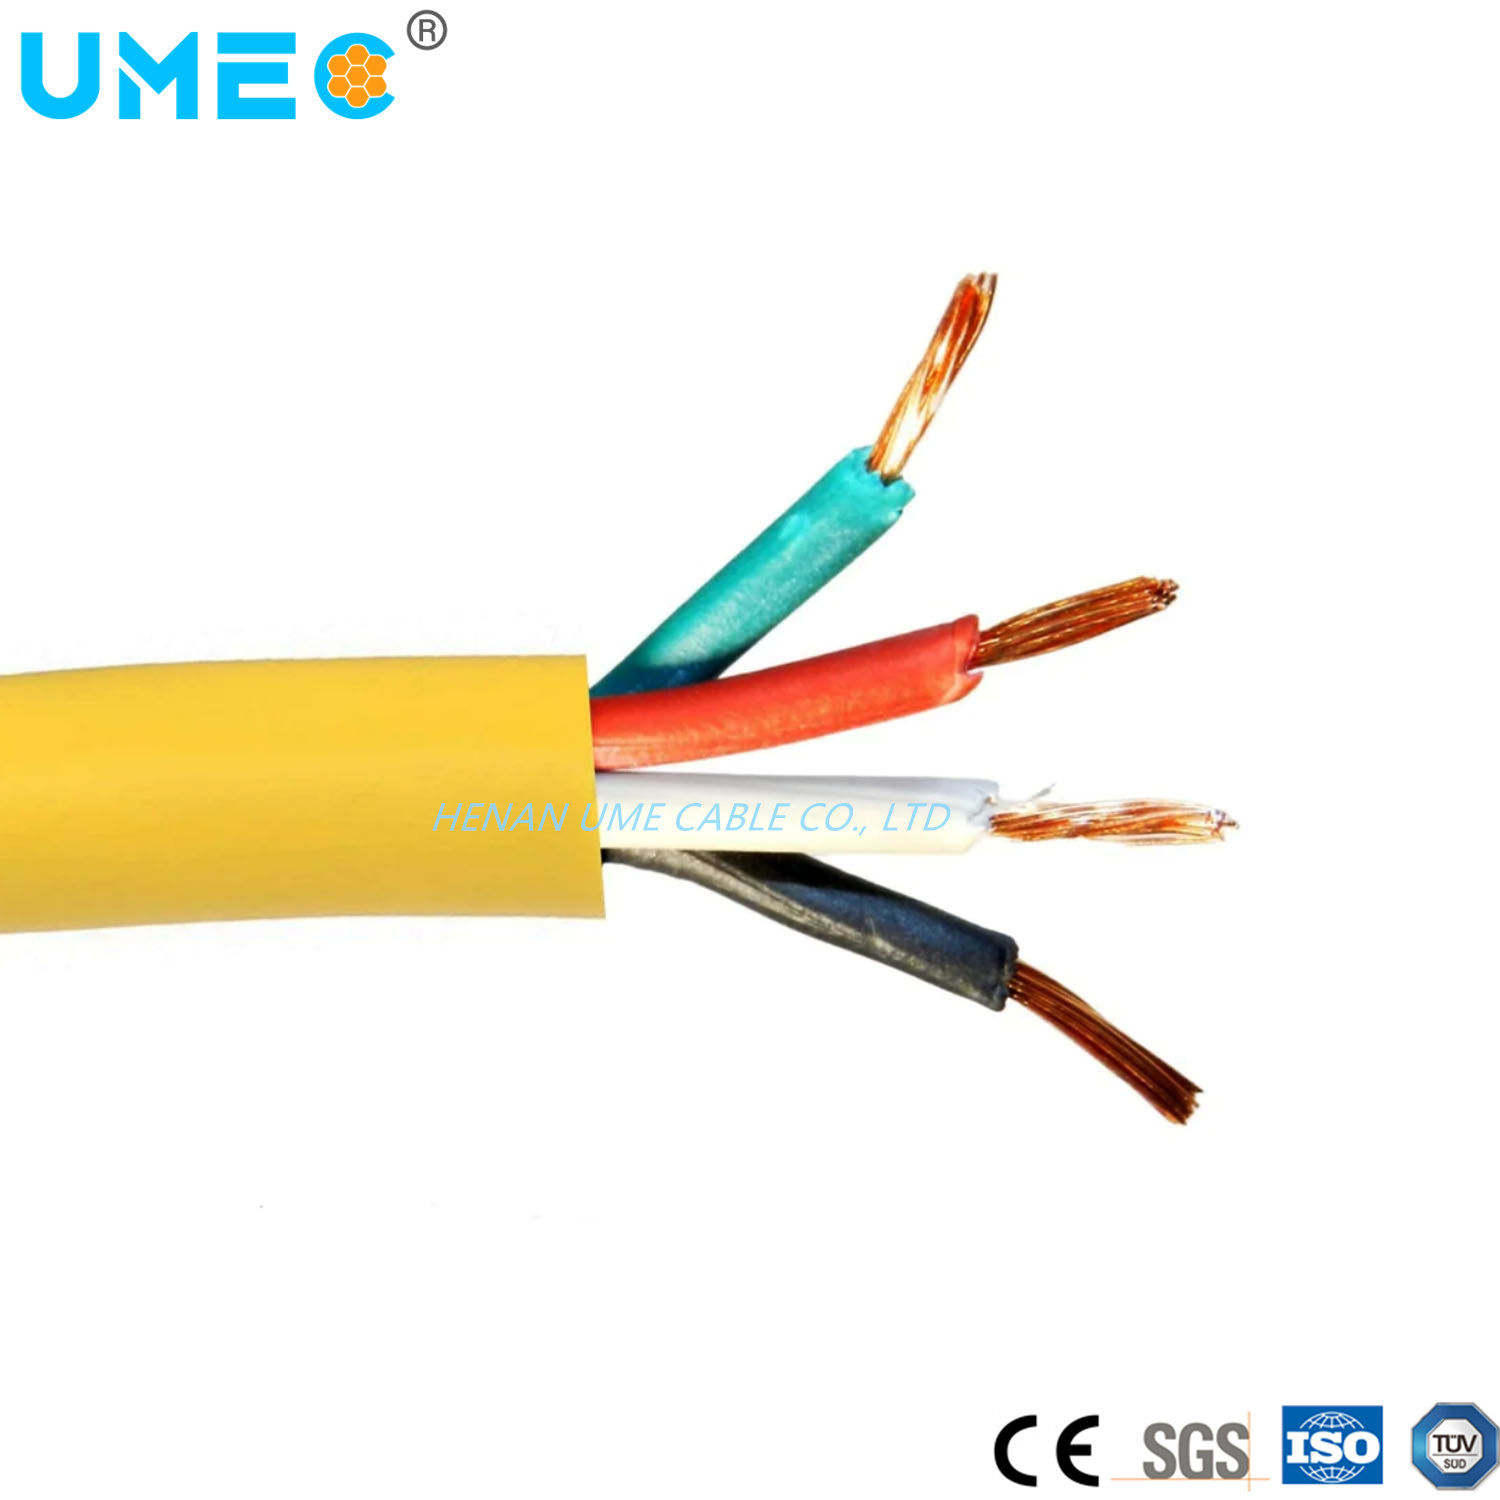 300V 600V Yellow Black Rubber Cable Direct So Sow Soow Sjoow CPE Epr Rubber Cable Wire 18 AWG up to 2AWG